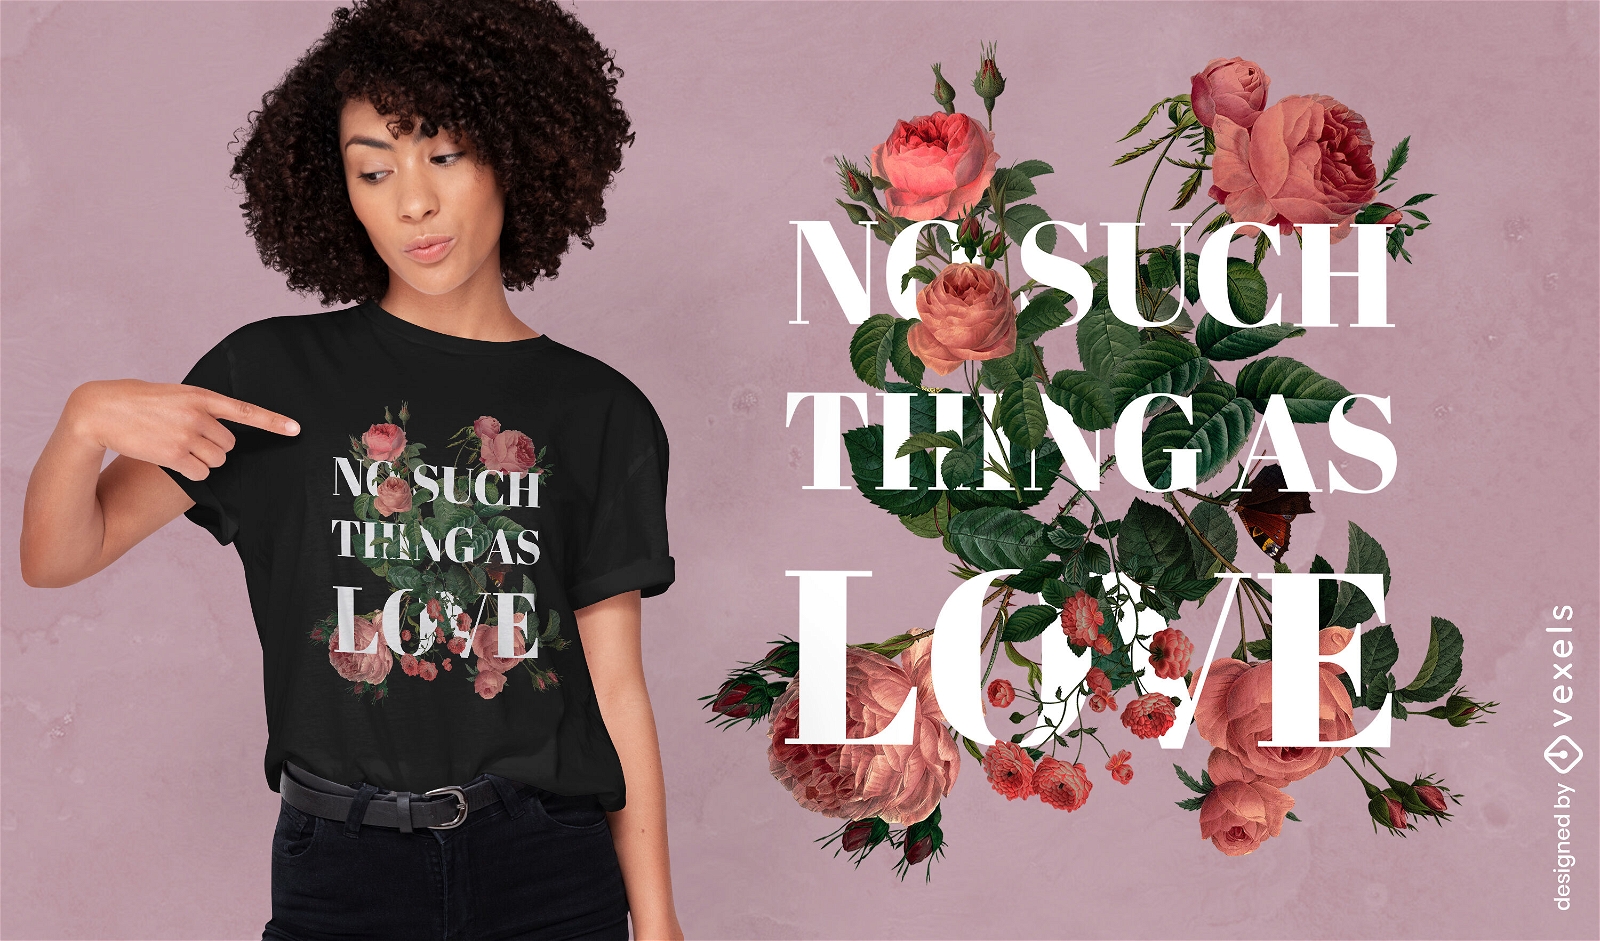 Rose flowers anti valentines day t-shirt psd